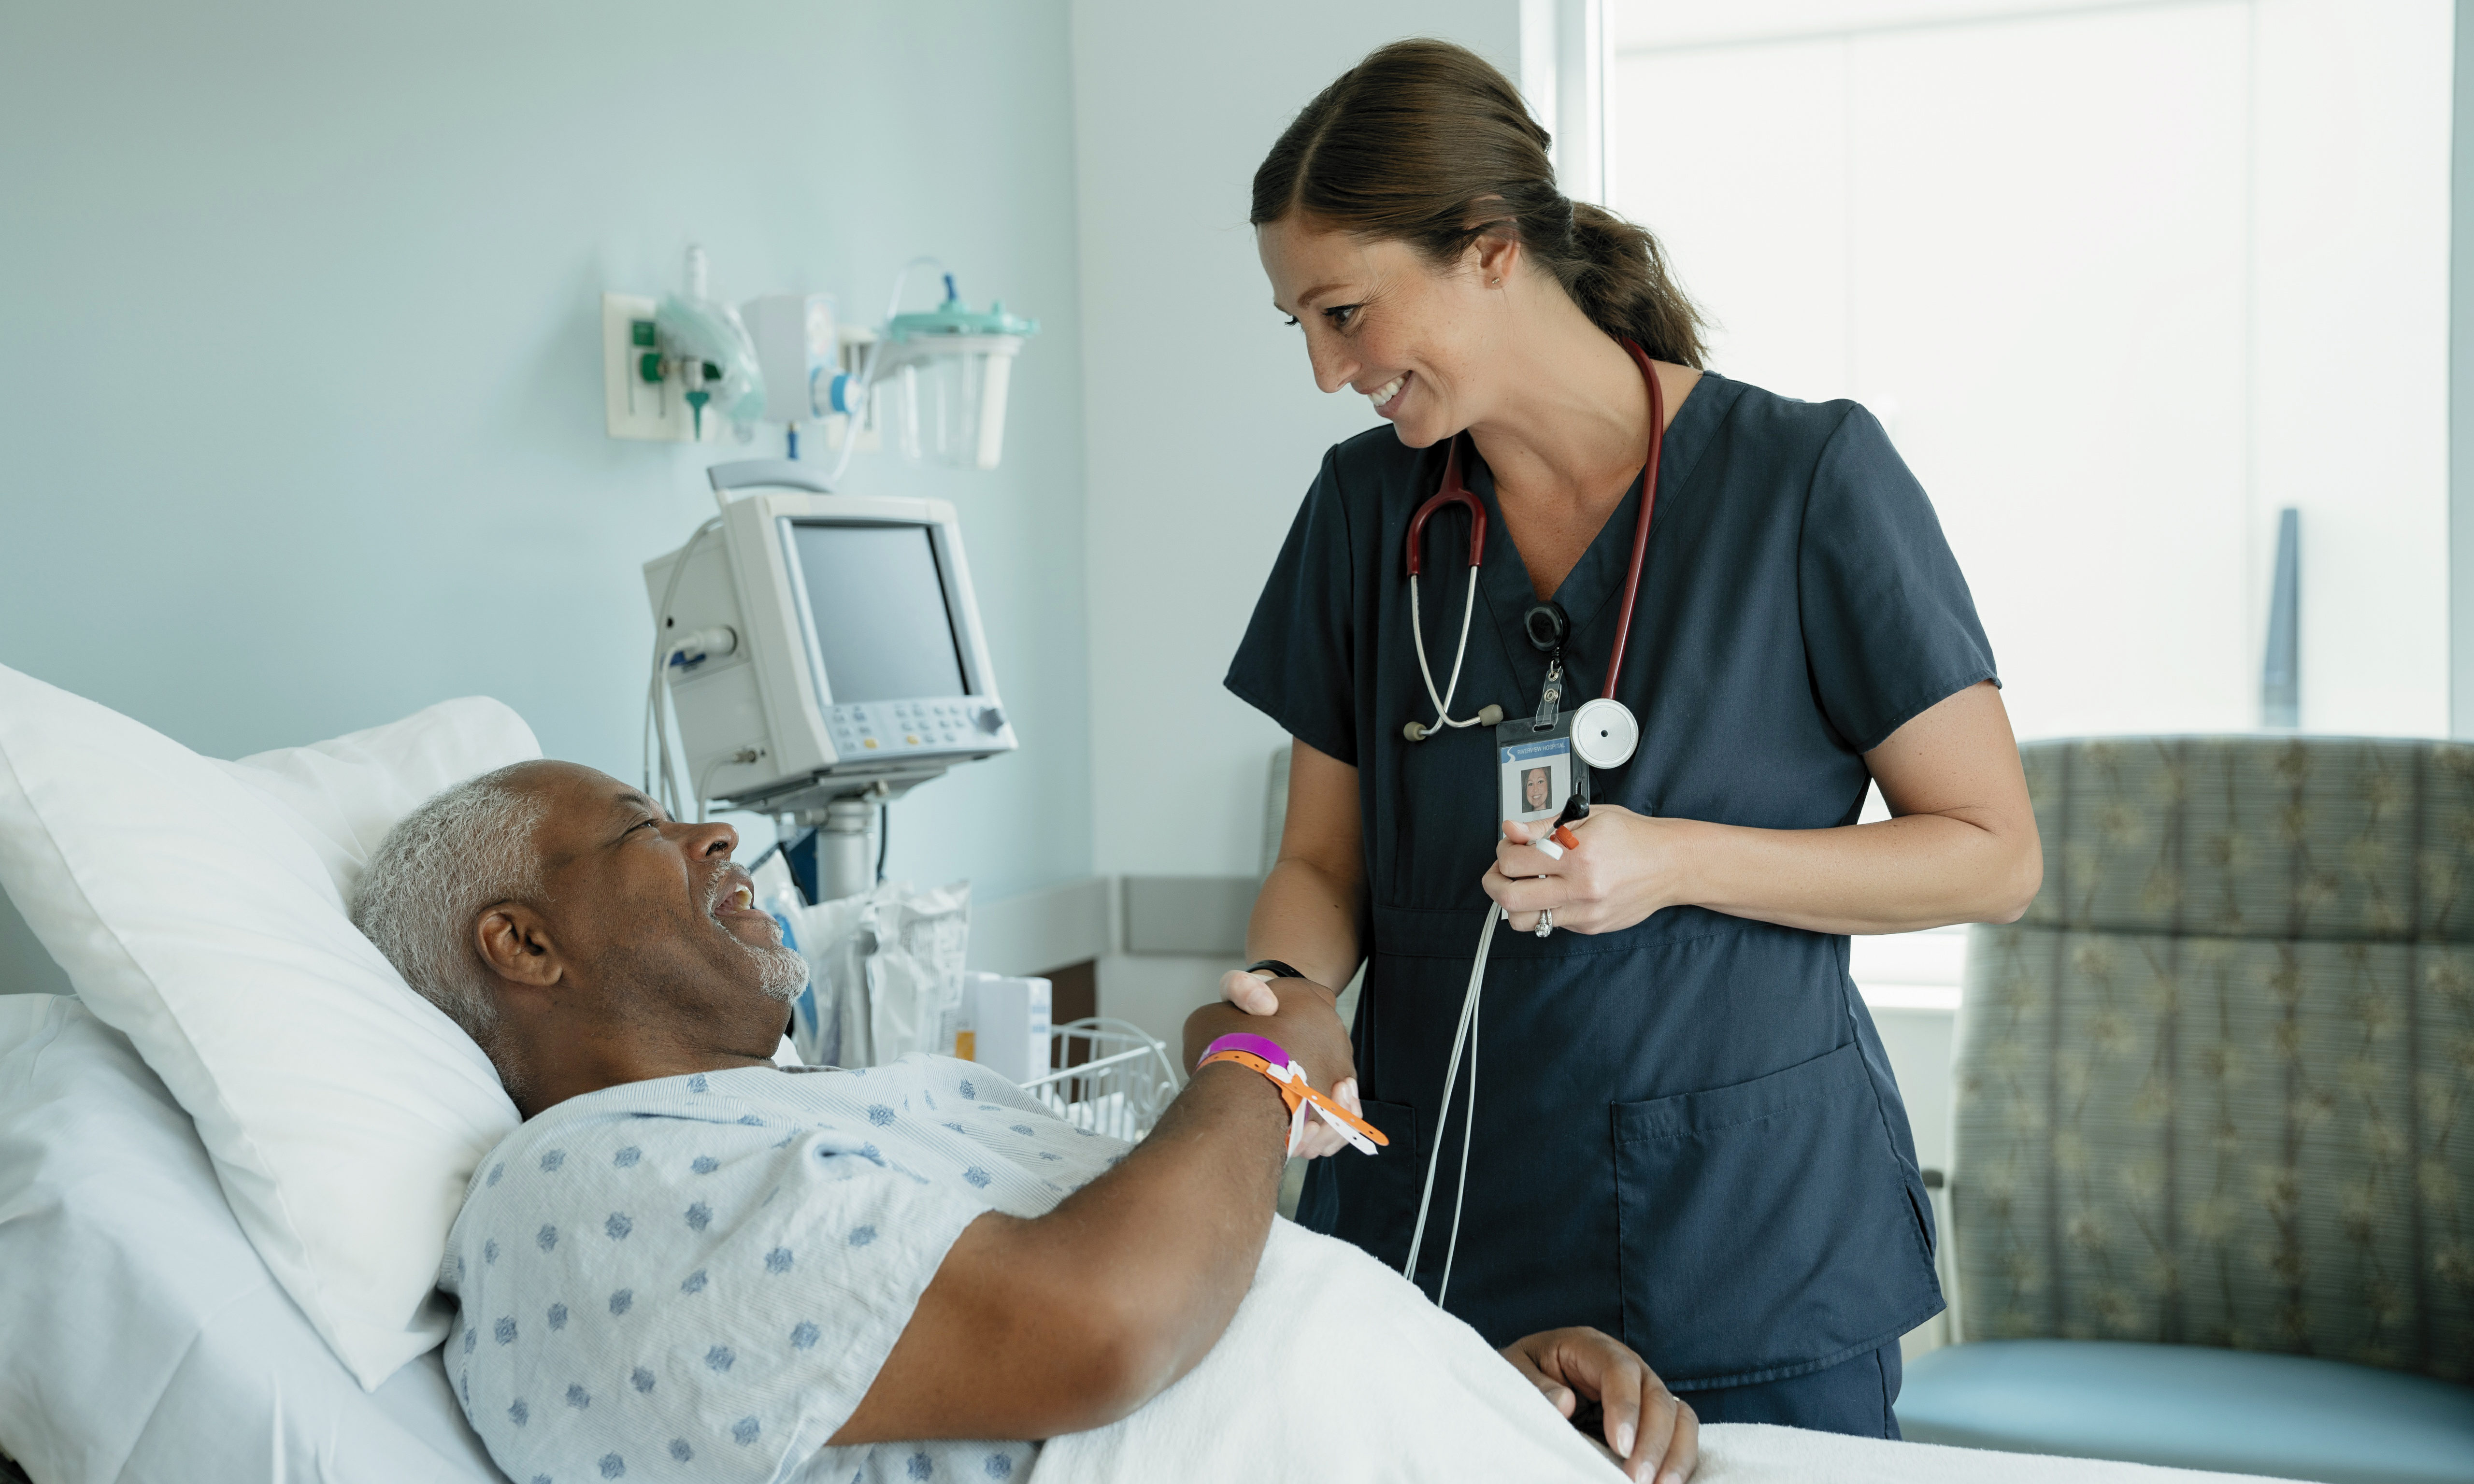 Nurses’ Critical – and Often Overlooked – Role in Provider and Patient